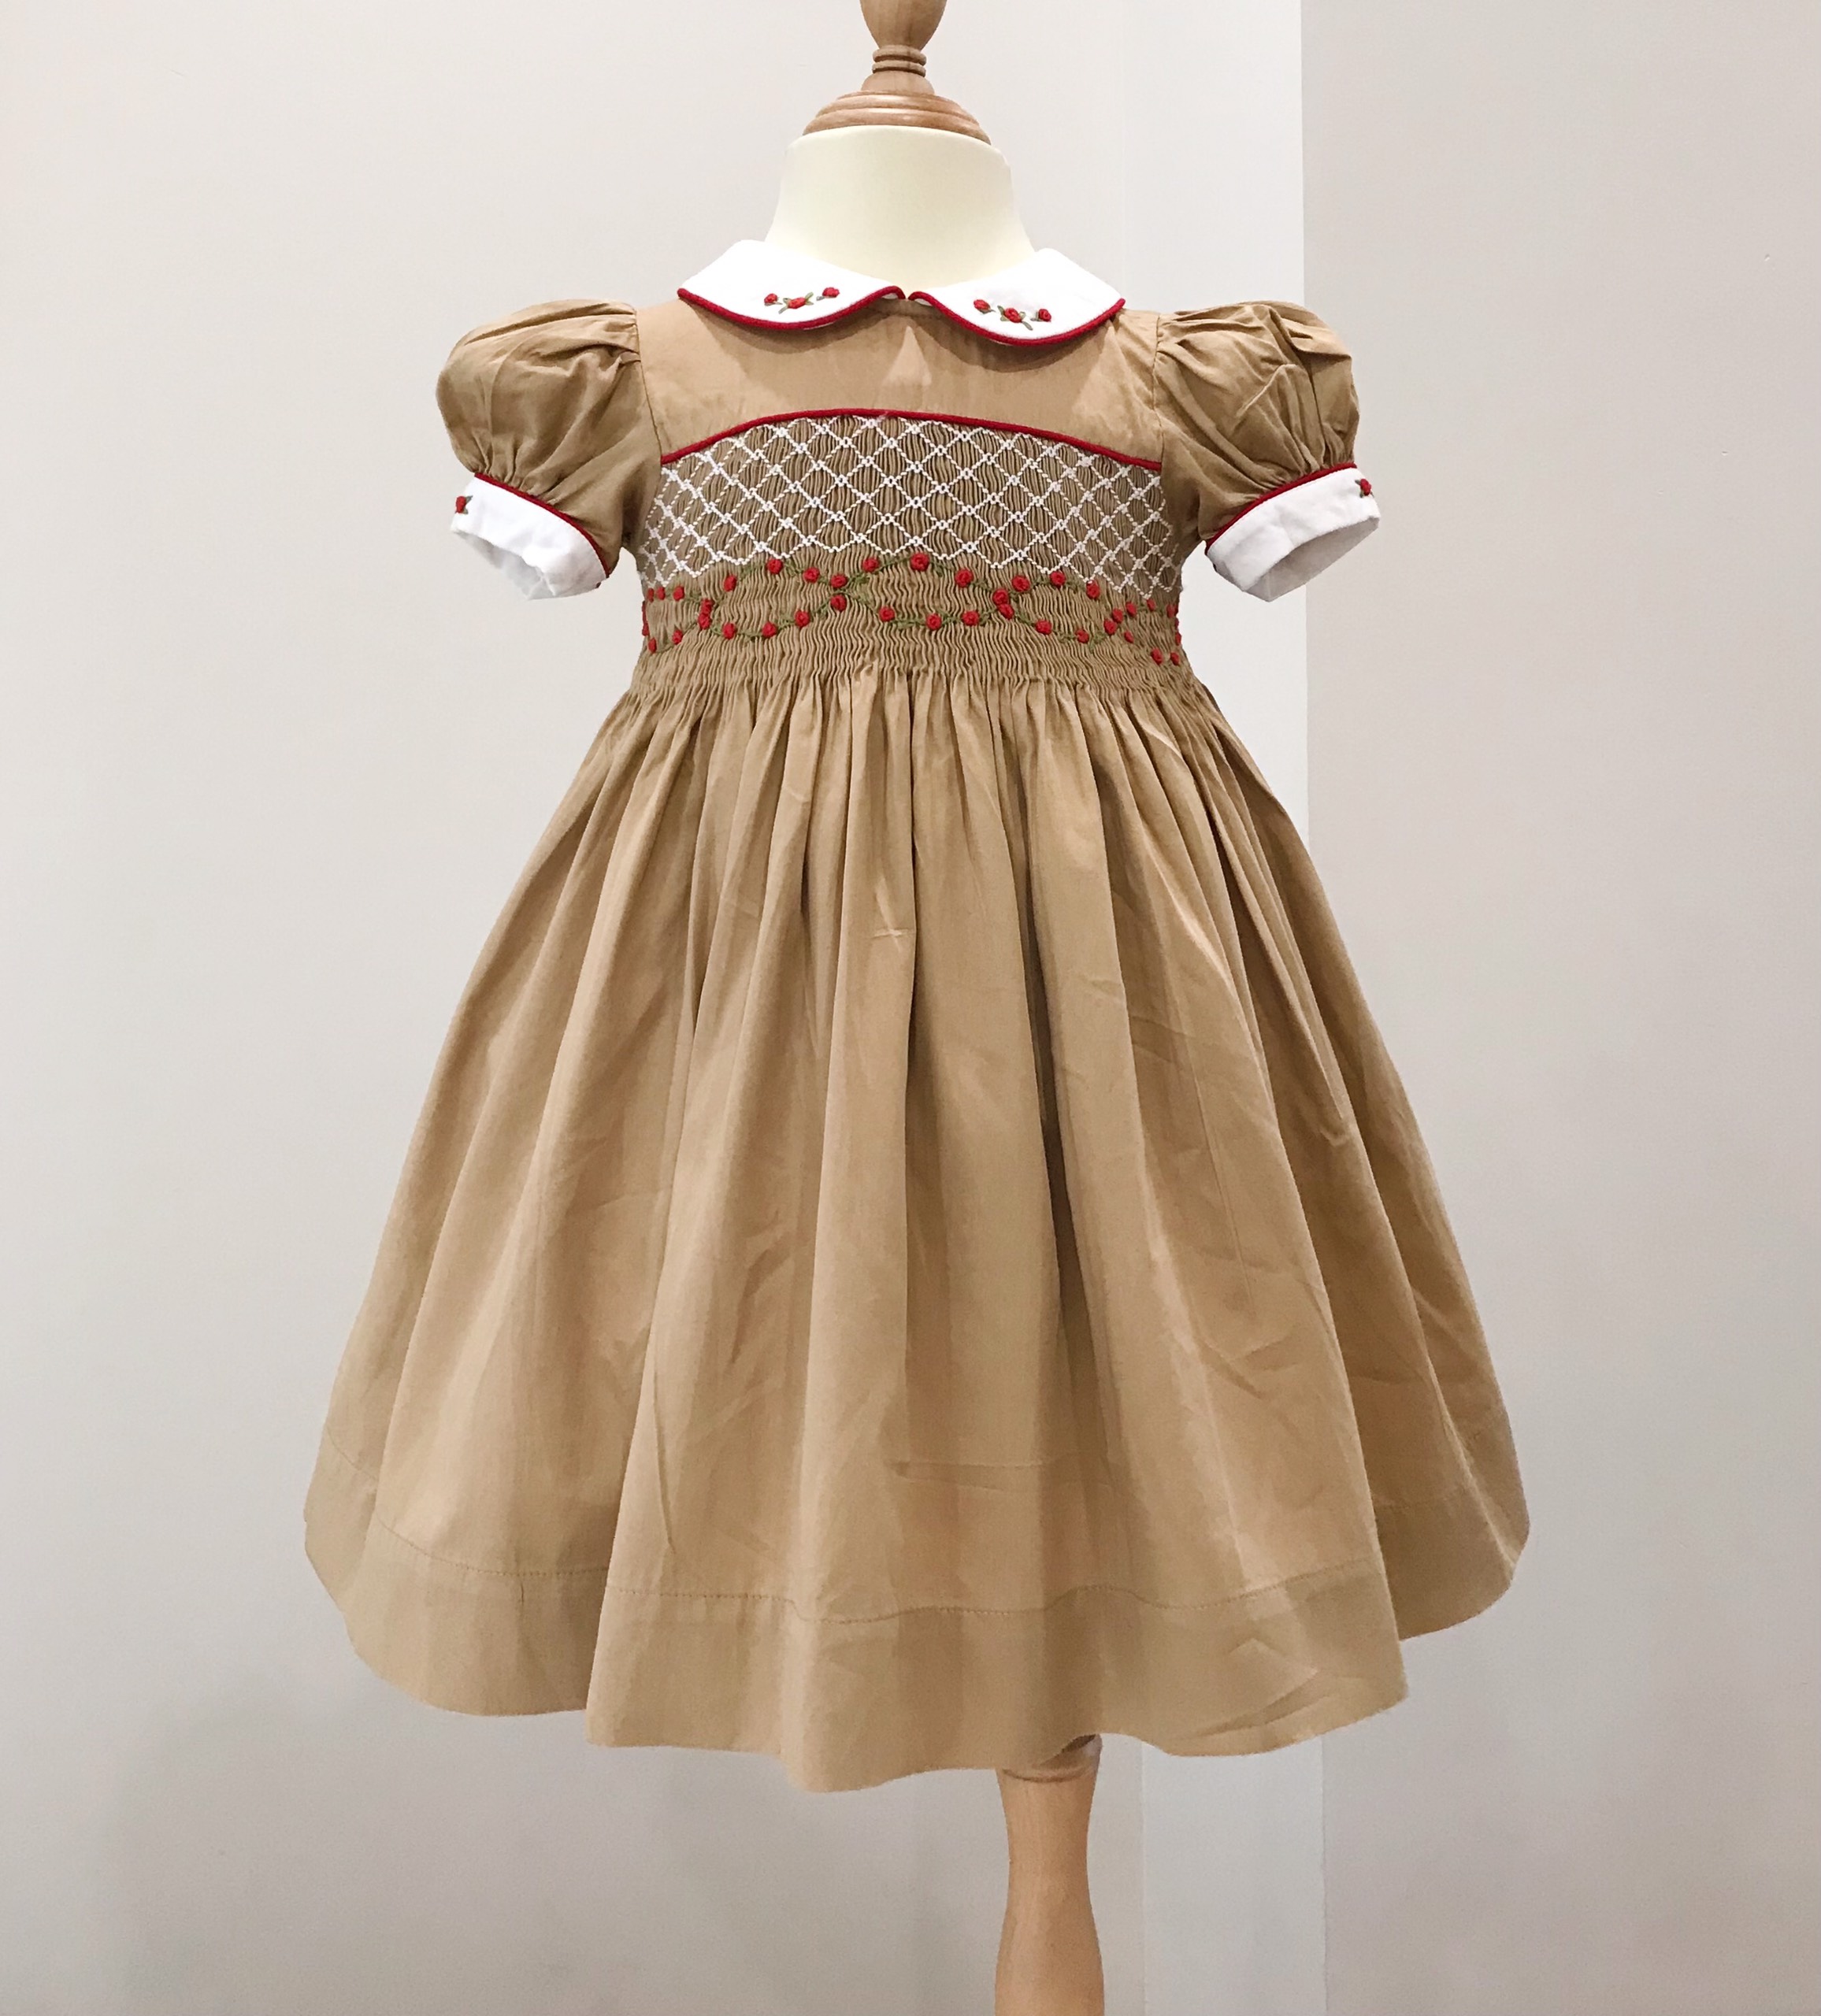 HANDMADE EMBROIDERY SMOCKED DRESS FOR CHILD GIRLS - Brown